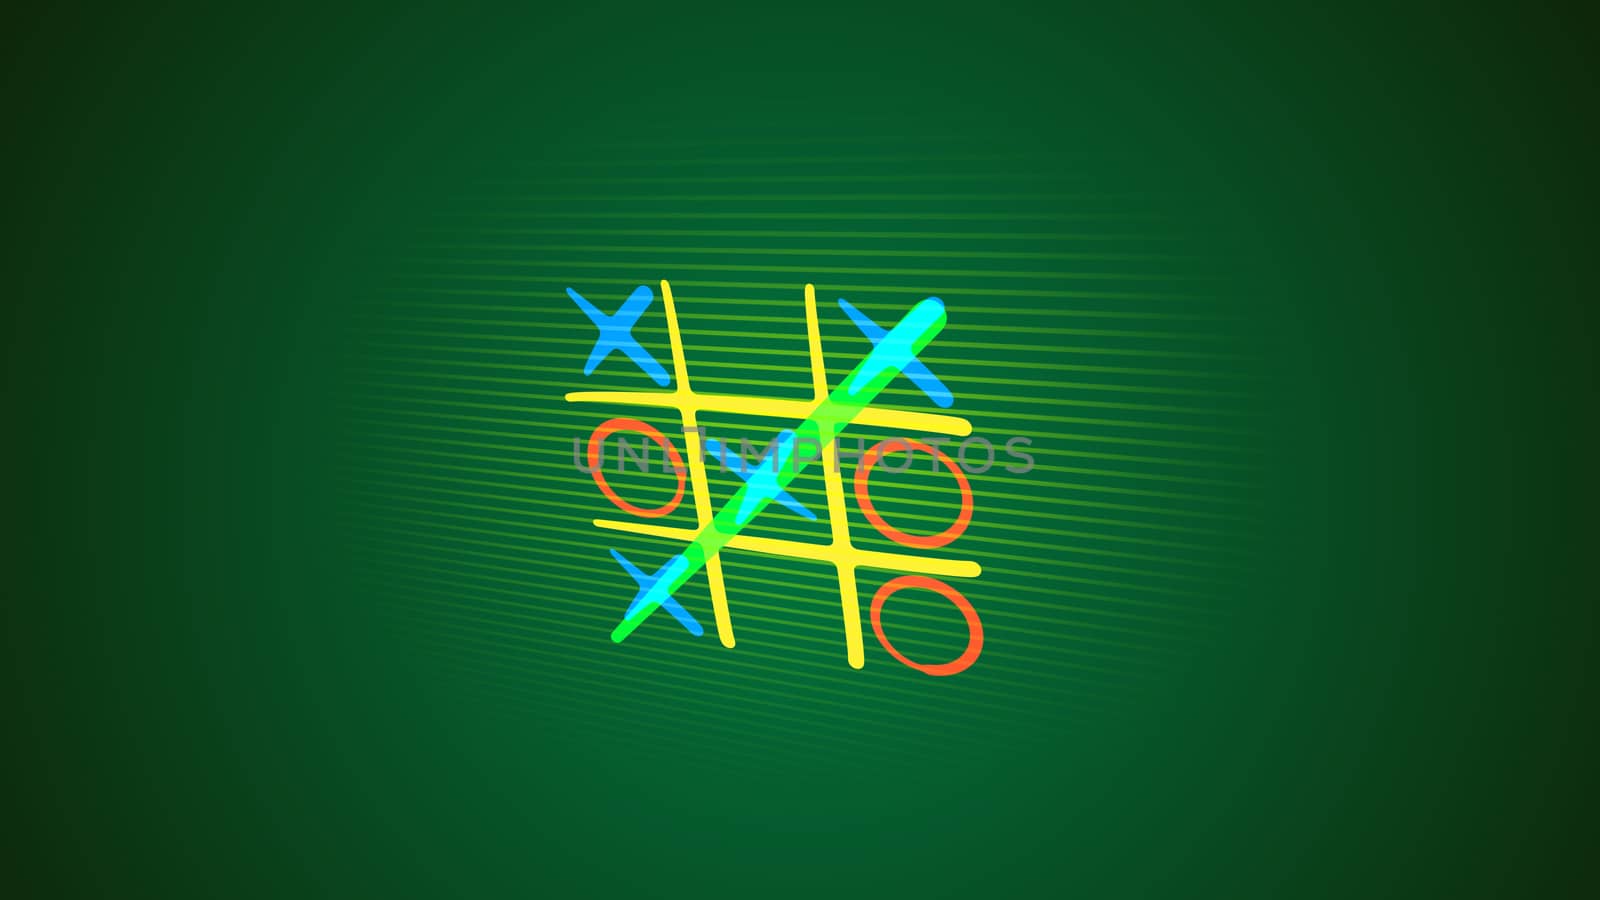 Impressive 3d illustration of a tic tac toe game with a white grid, pink and celeste marks, a winning diagonal end and a long line in the green background. It looks cheery